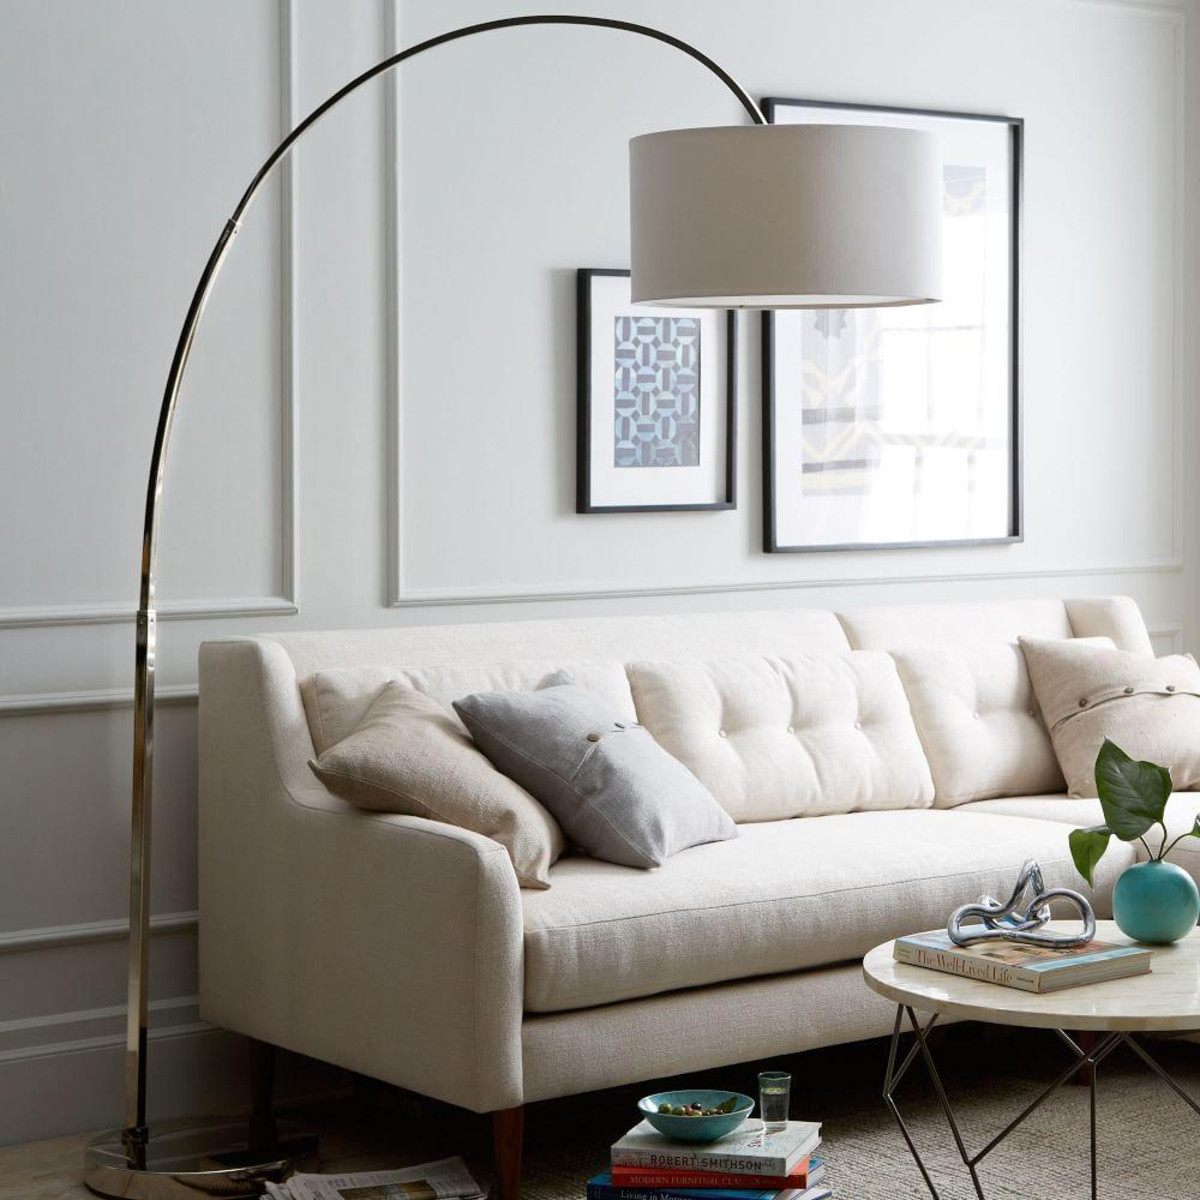 Overarching Floor Lamp Room Disacode Home Design From with size 1200 X 1200